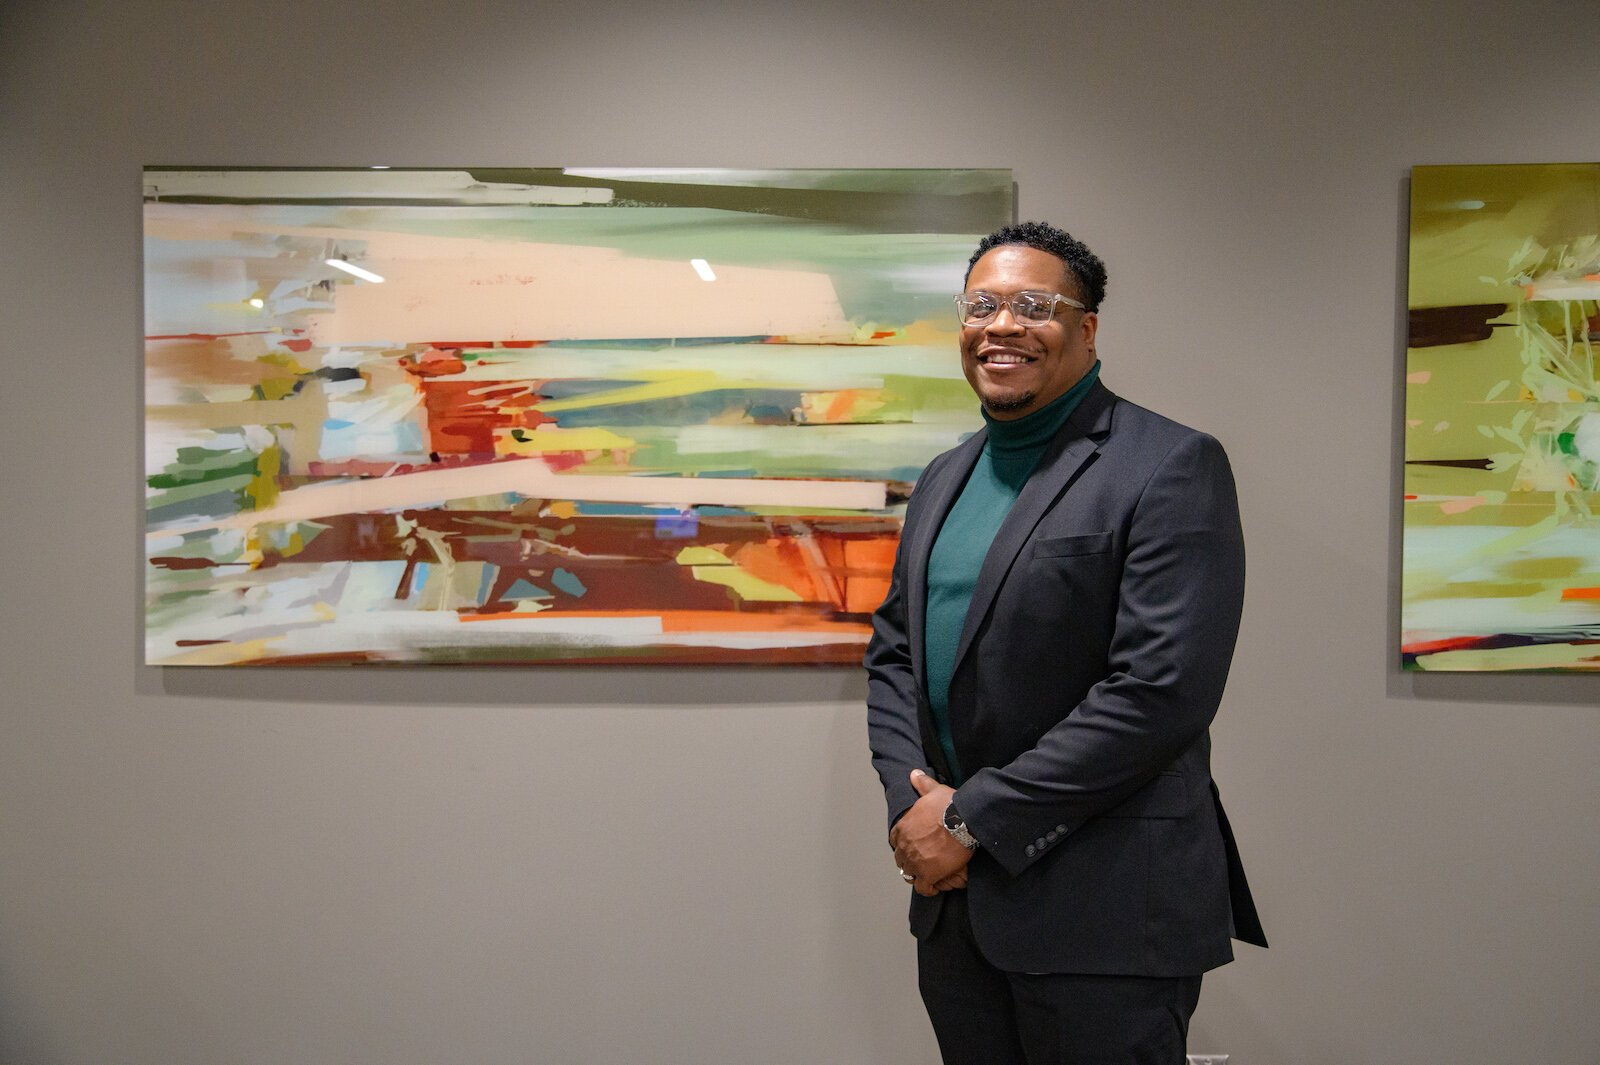 Theoplis Smith III, known to the community as Phresh Laundry, understood the vision for Parkview Southwest and helped bring the facility to life through his artwork.